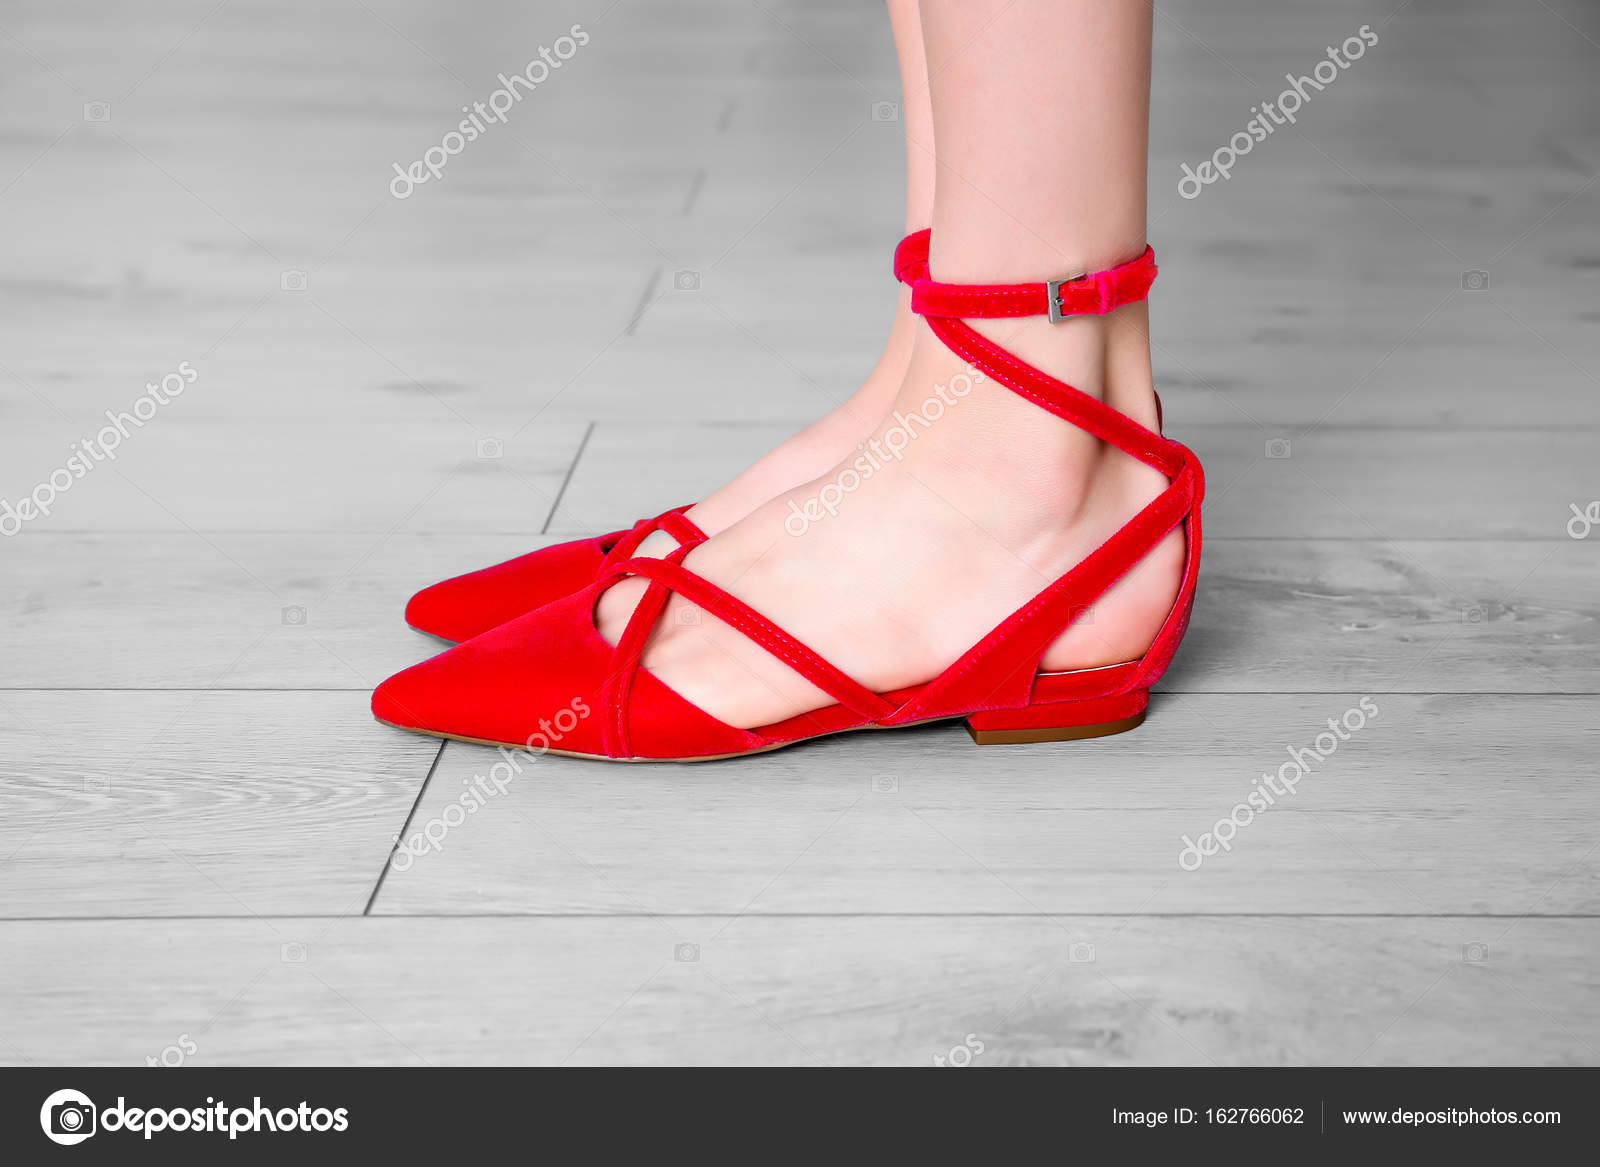 stylish flat shoes for ladies